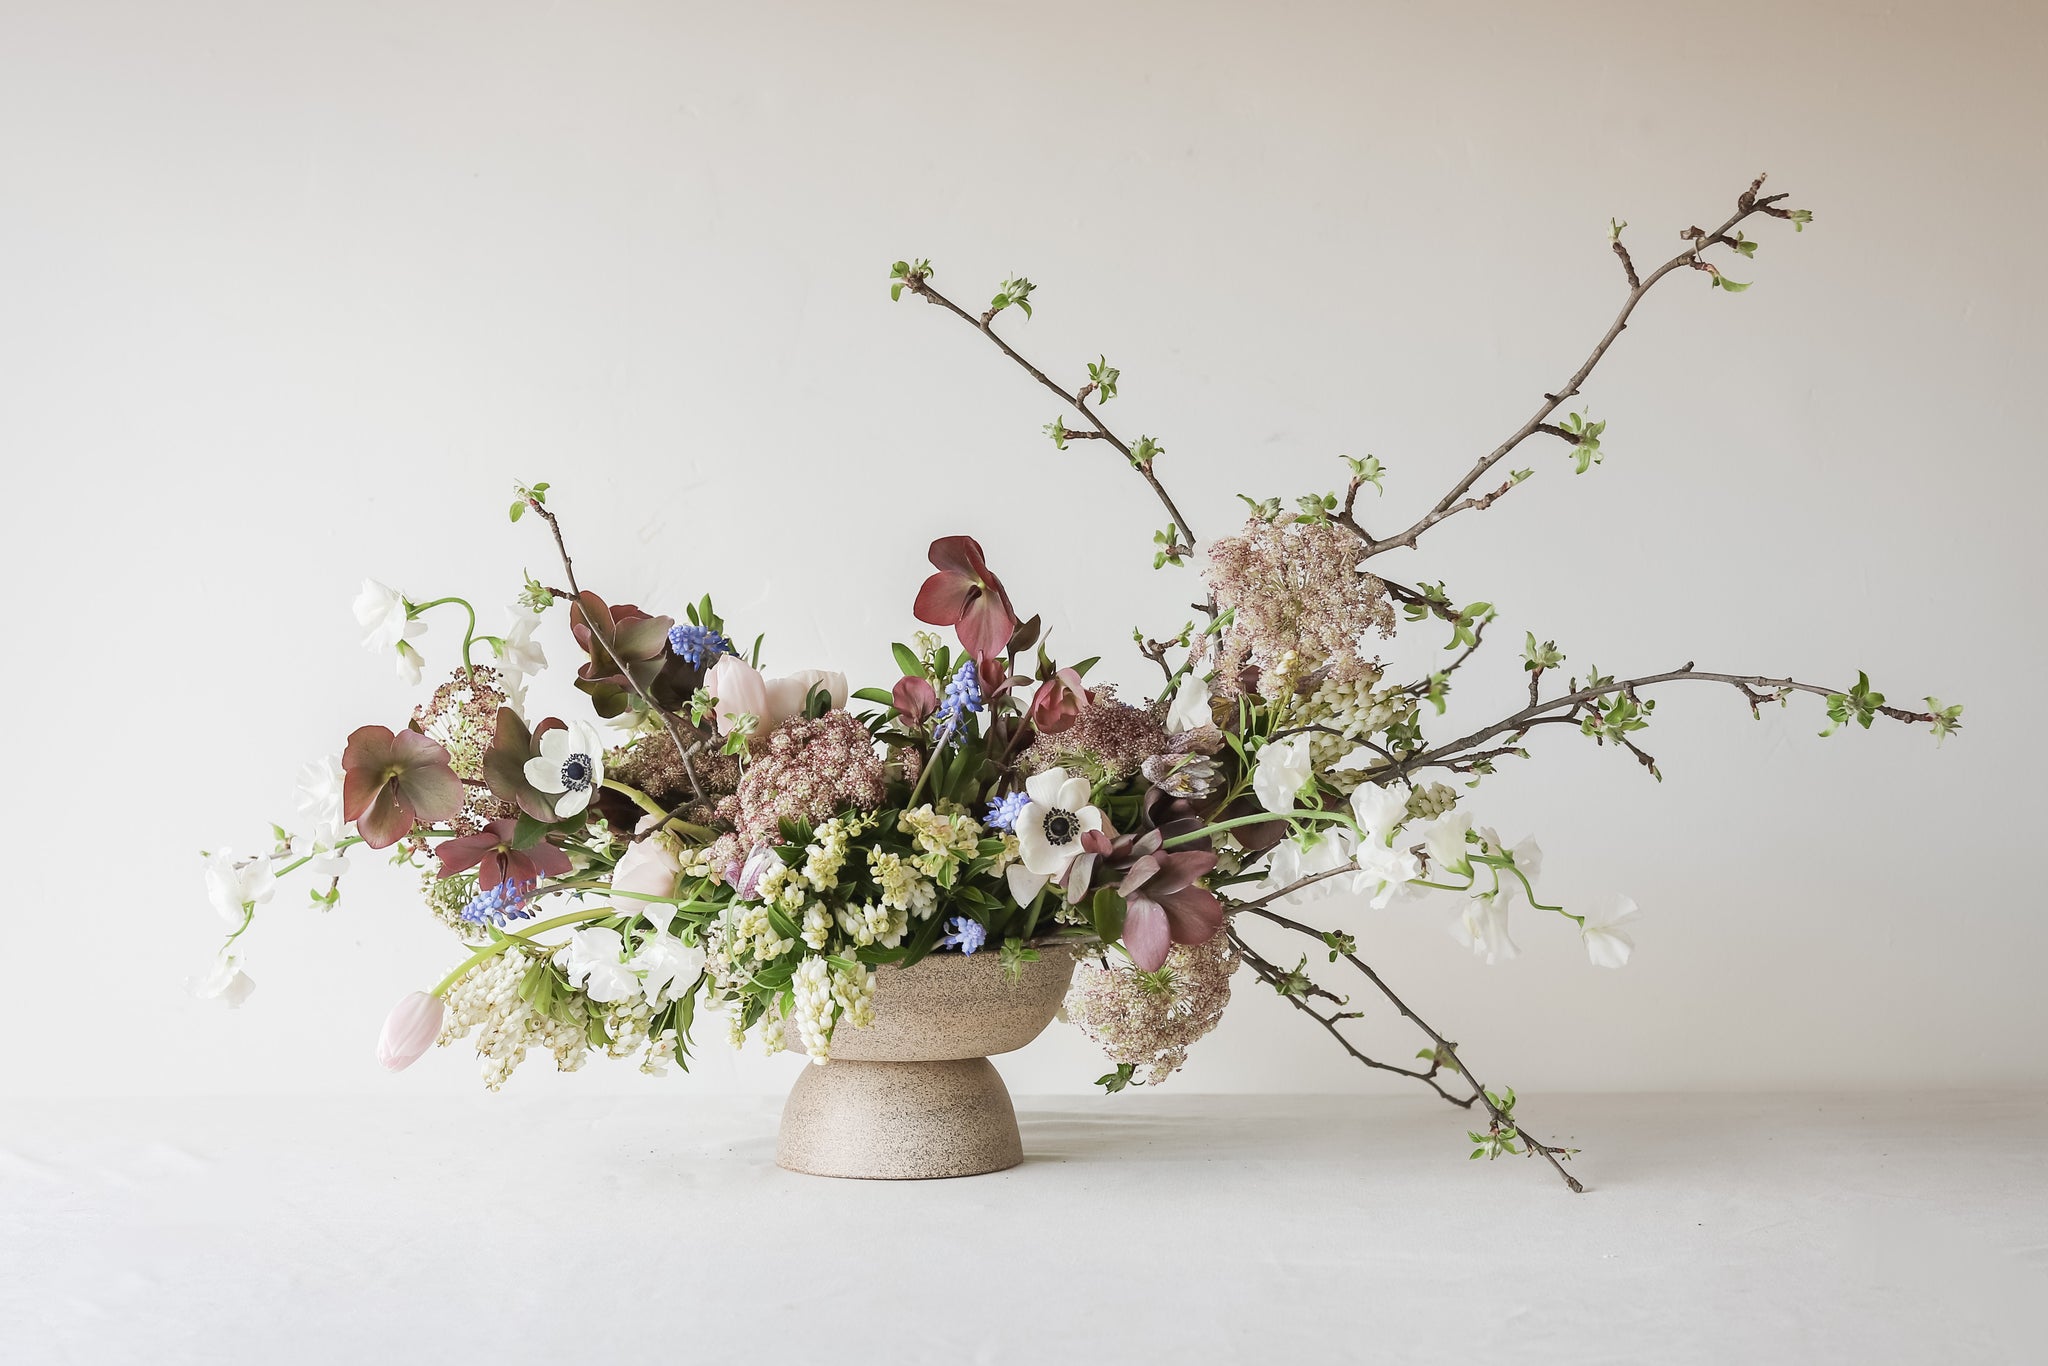 A home grown floral arrangement made by Becky Wallace.